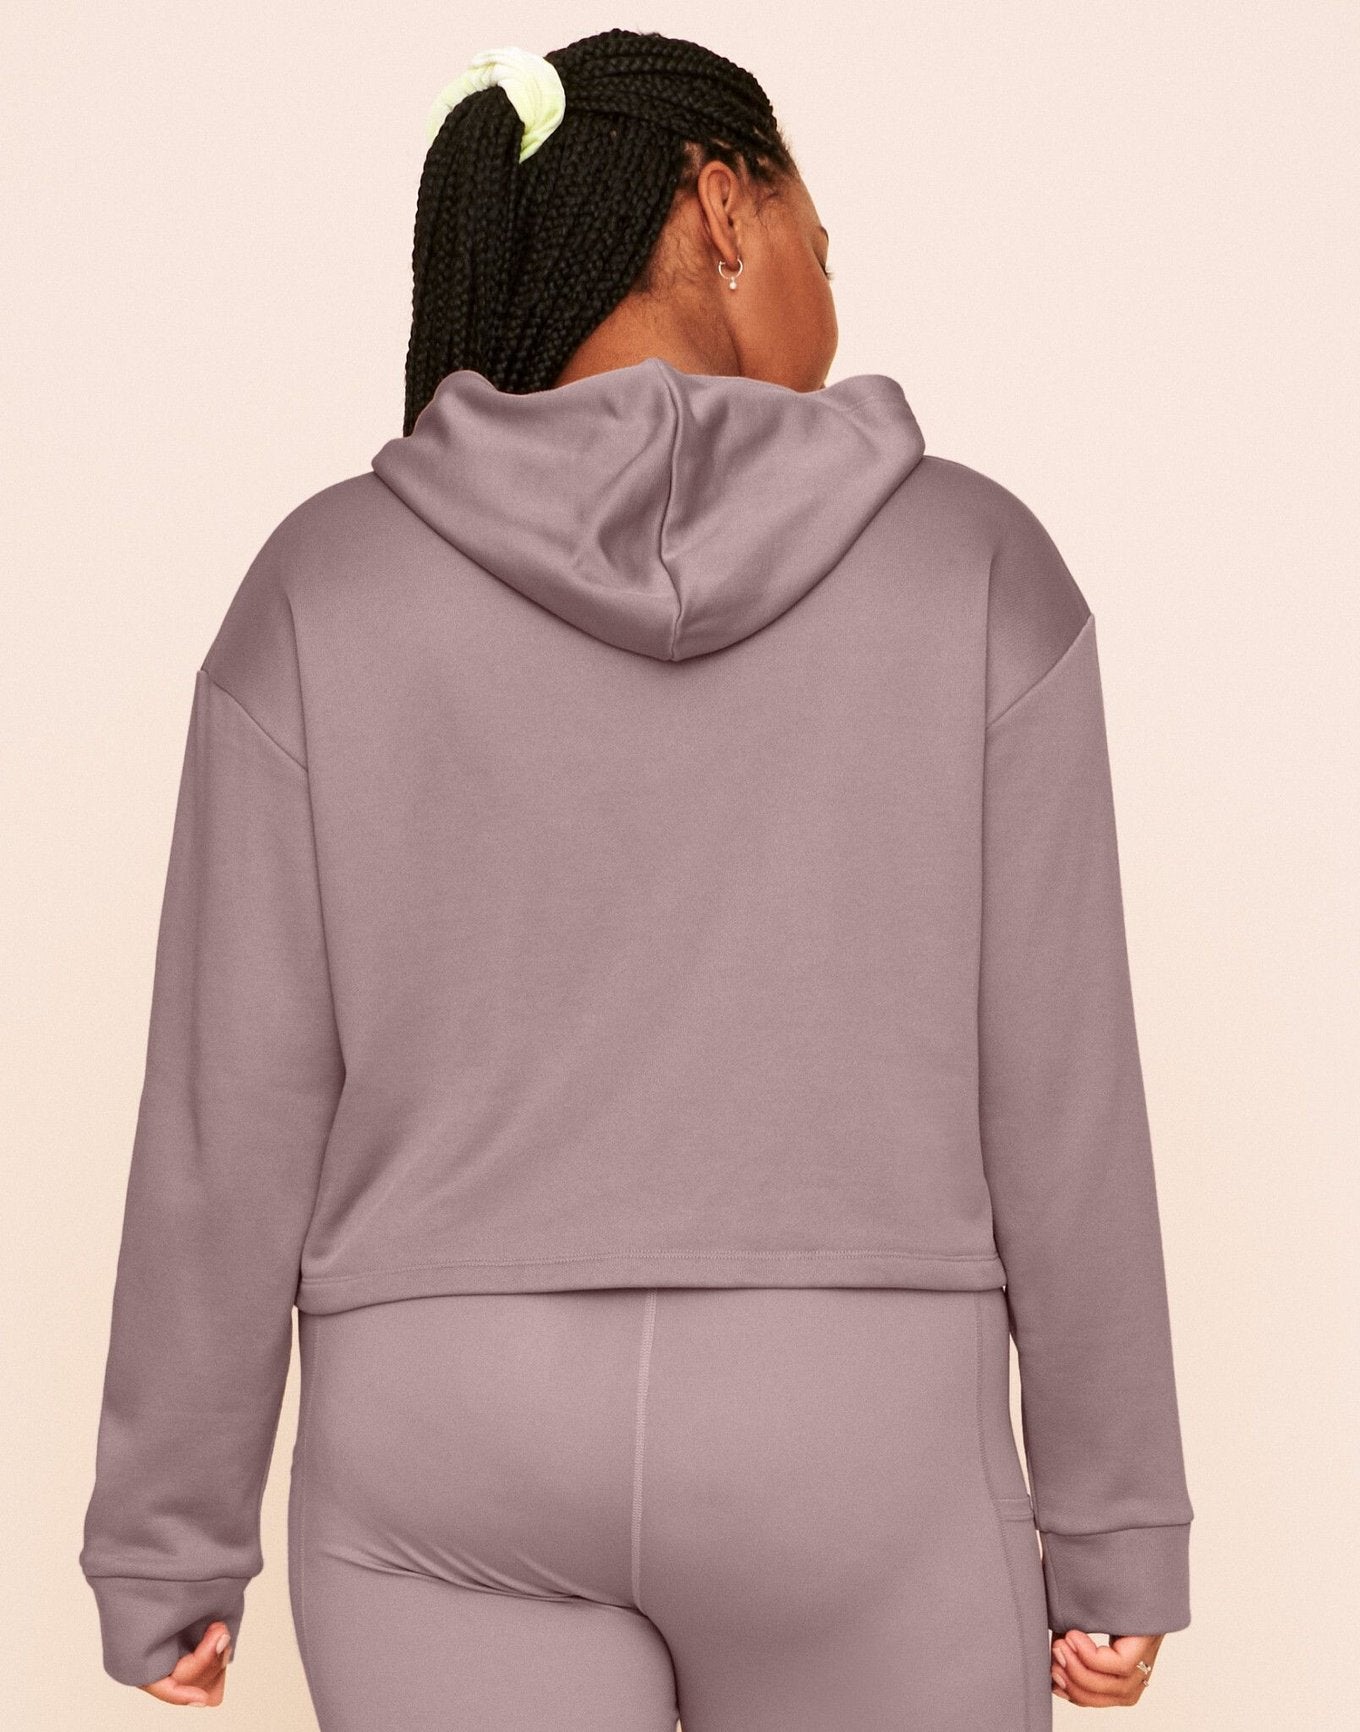 Earth Republic Myah Escape Luxe Hoodie Cropped Hoodie in color Deauville Mauve and shape hoodie